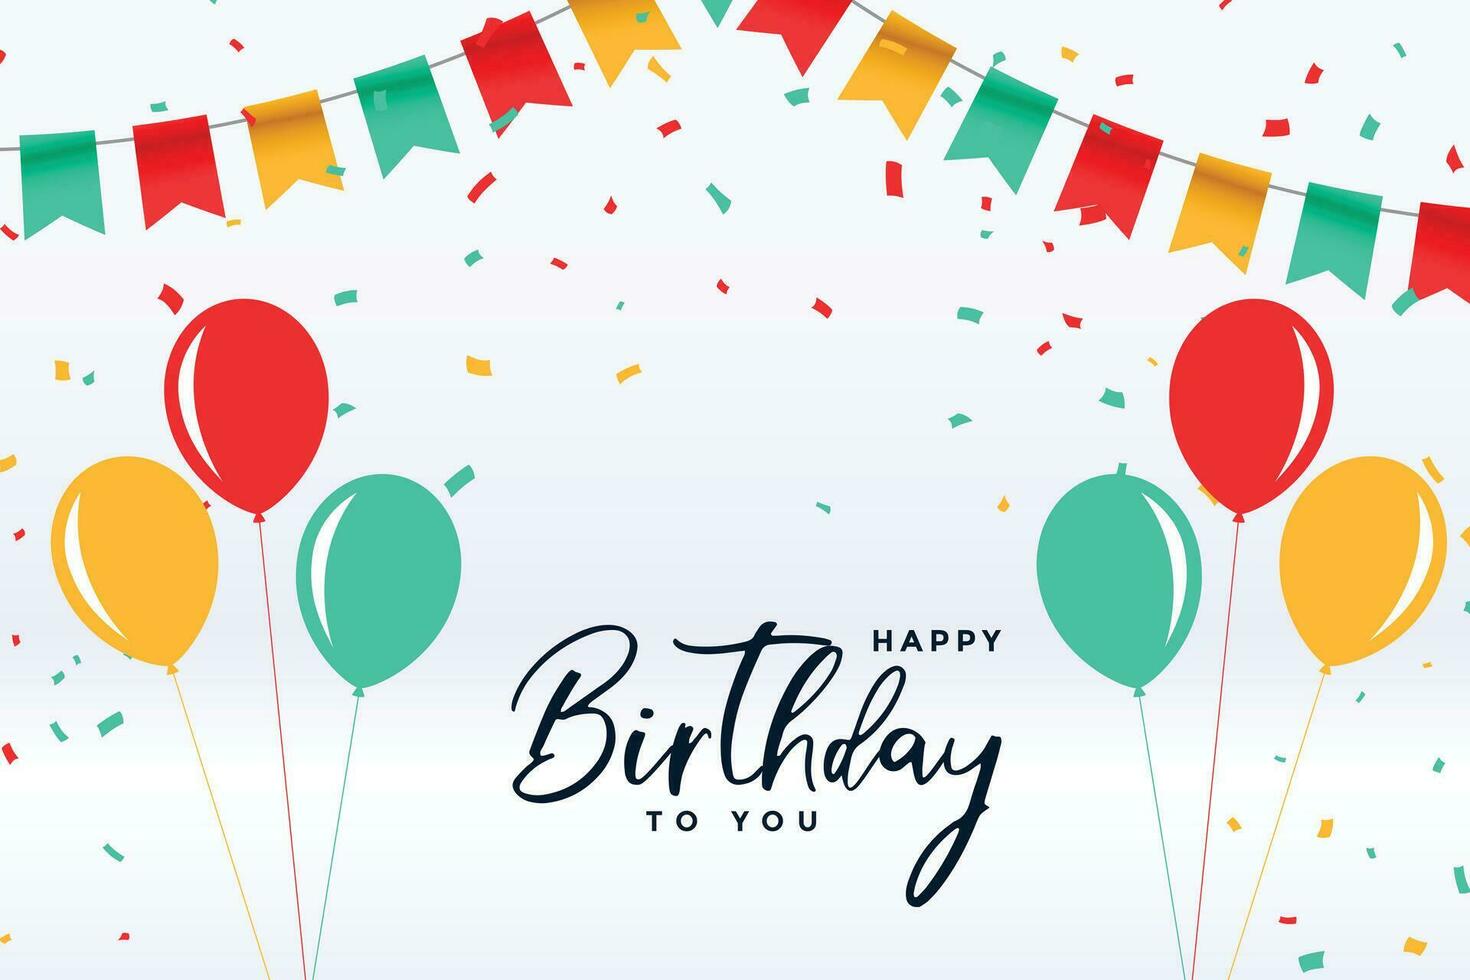 flat style happy birthday balloons and confetti background vector